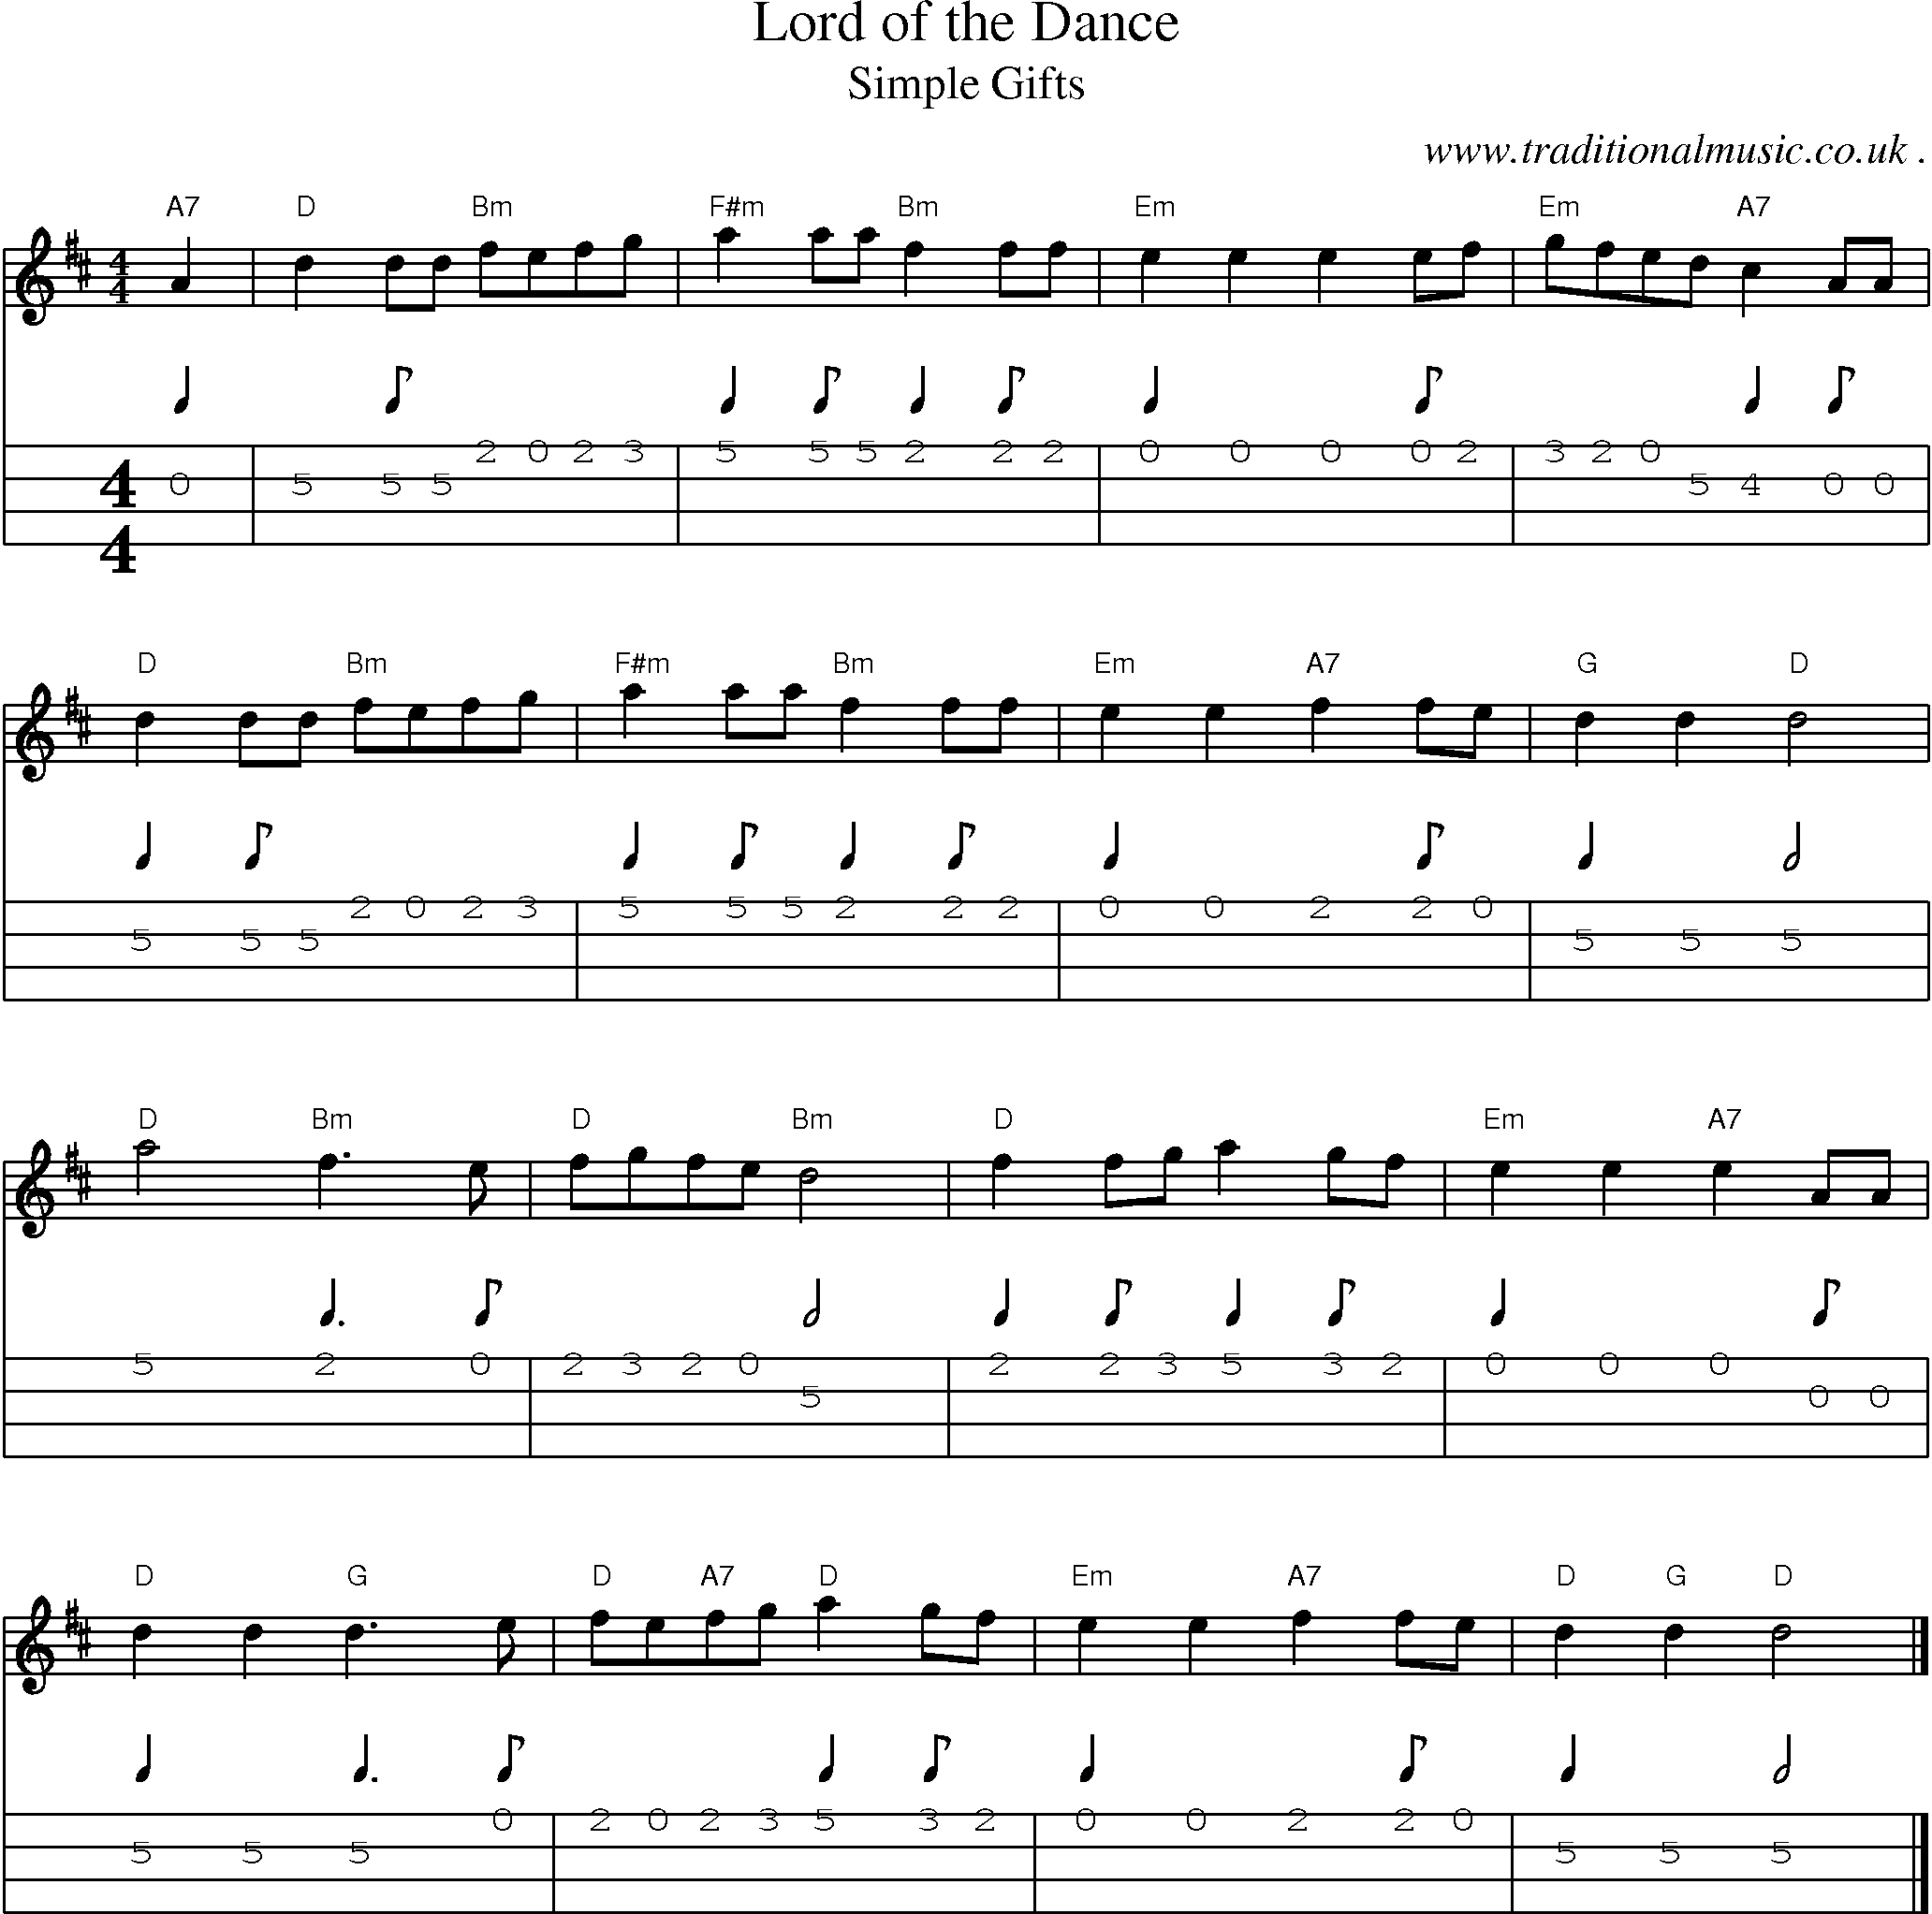 Music Score and Guitar Tabs for Lord of the Dance